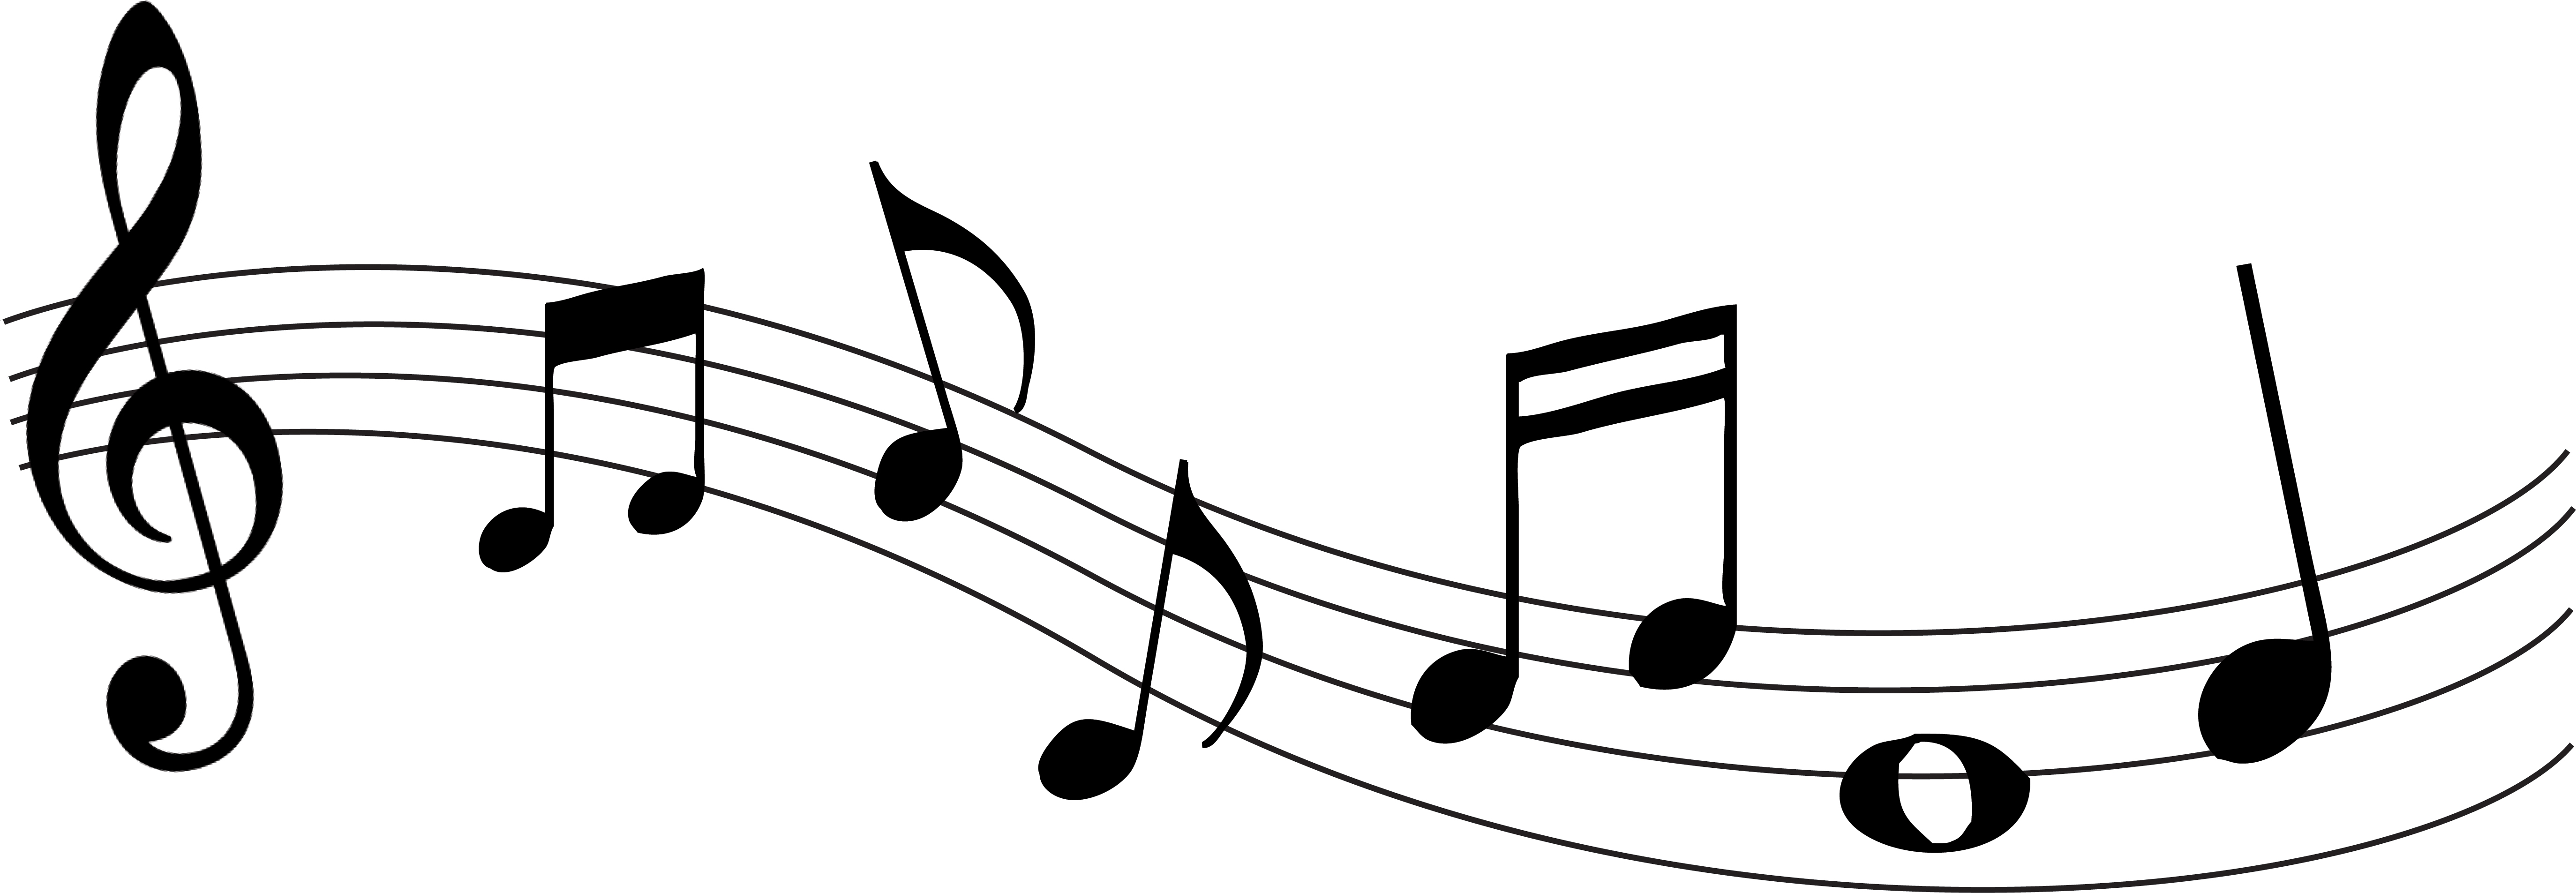 images-of-music-symbols-free-download-on-clipartmag